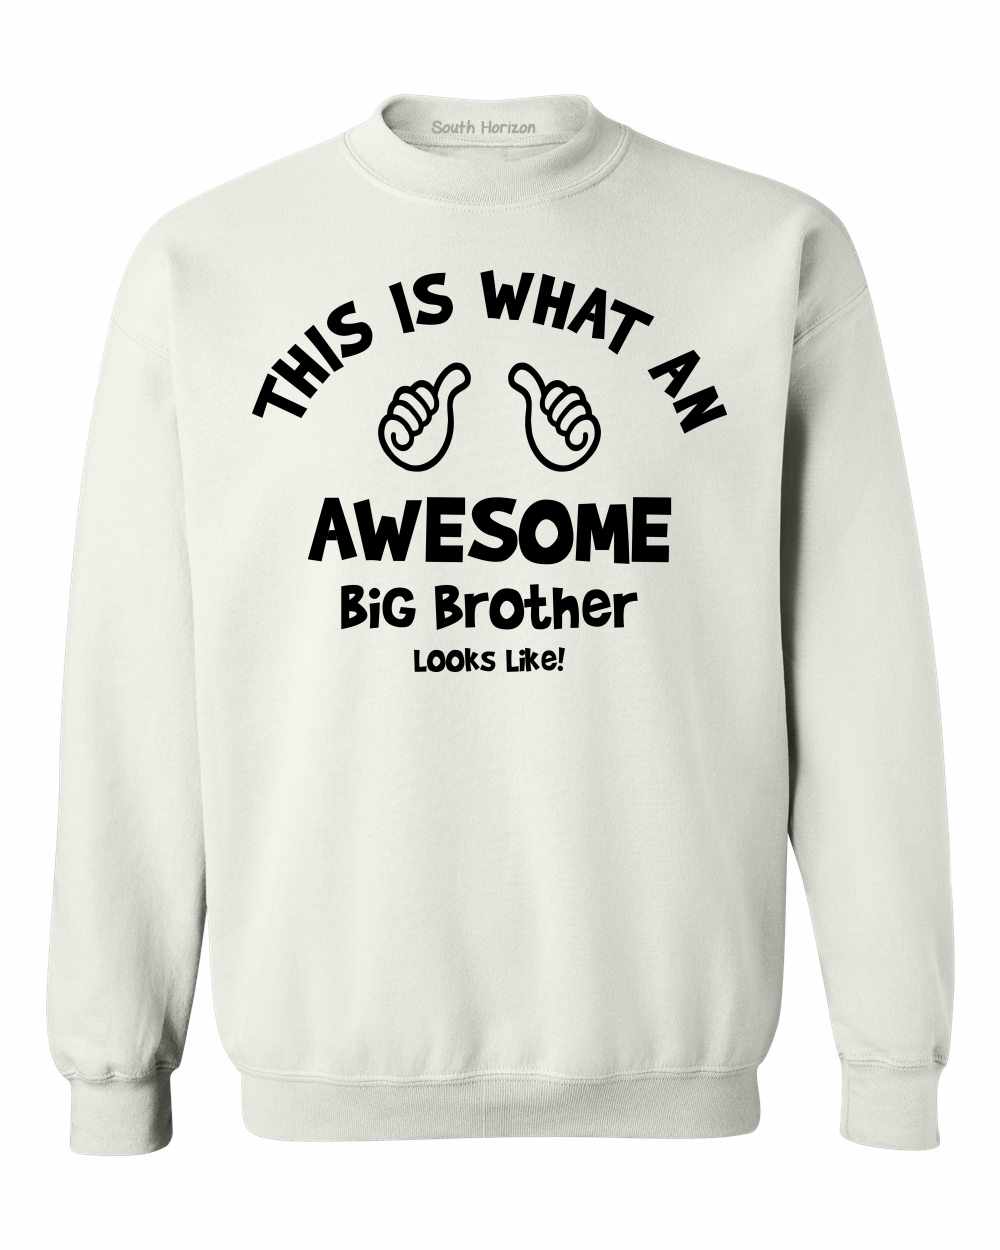 This is What an AWESOME BIG BROTHER Looks Like Sweat Shirt (#964-11)